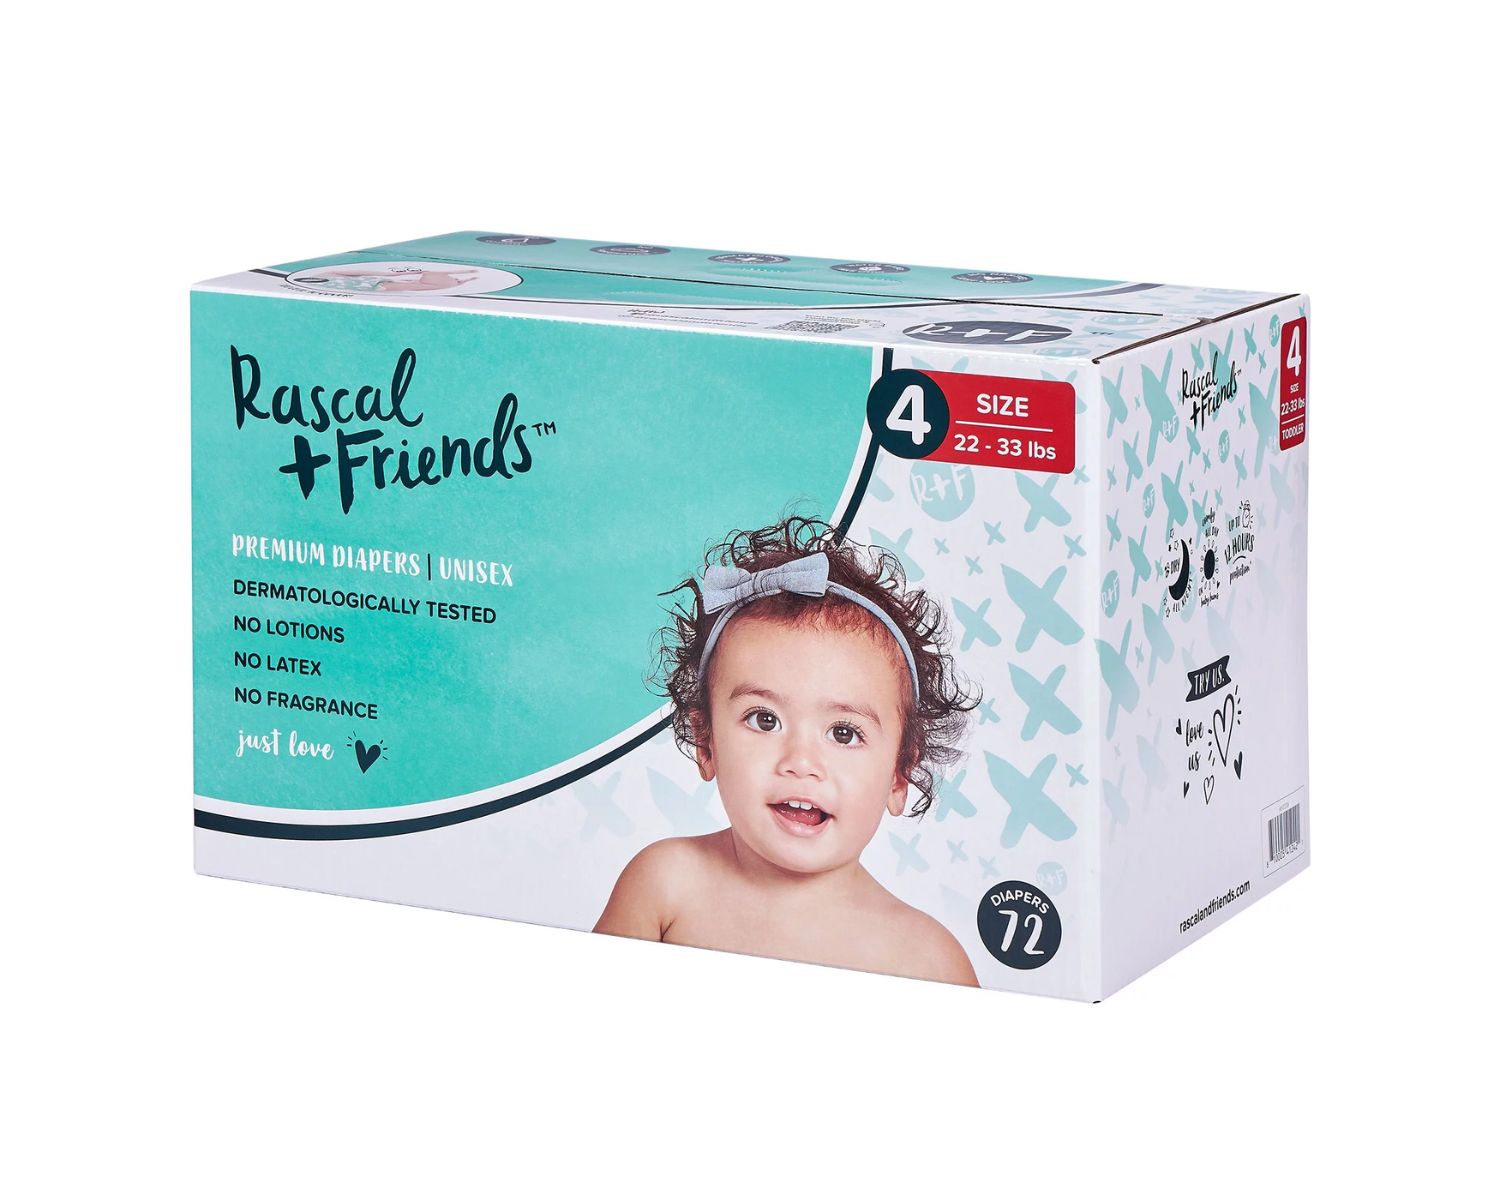 13-intriguing-facts-about-rascal-and-friends-diapers